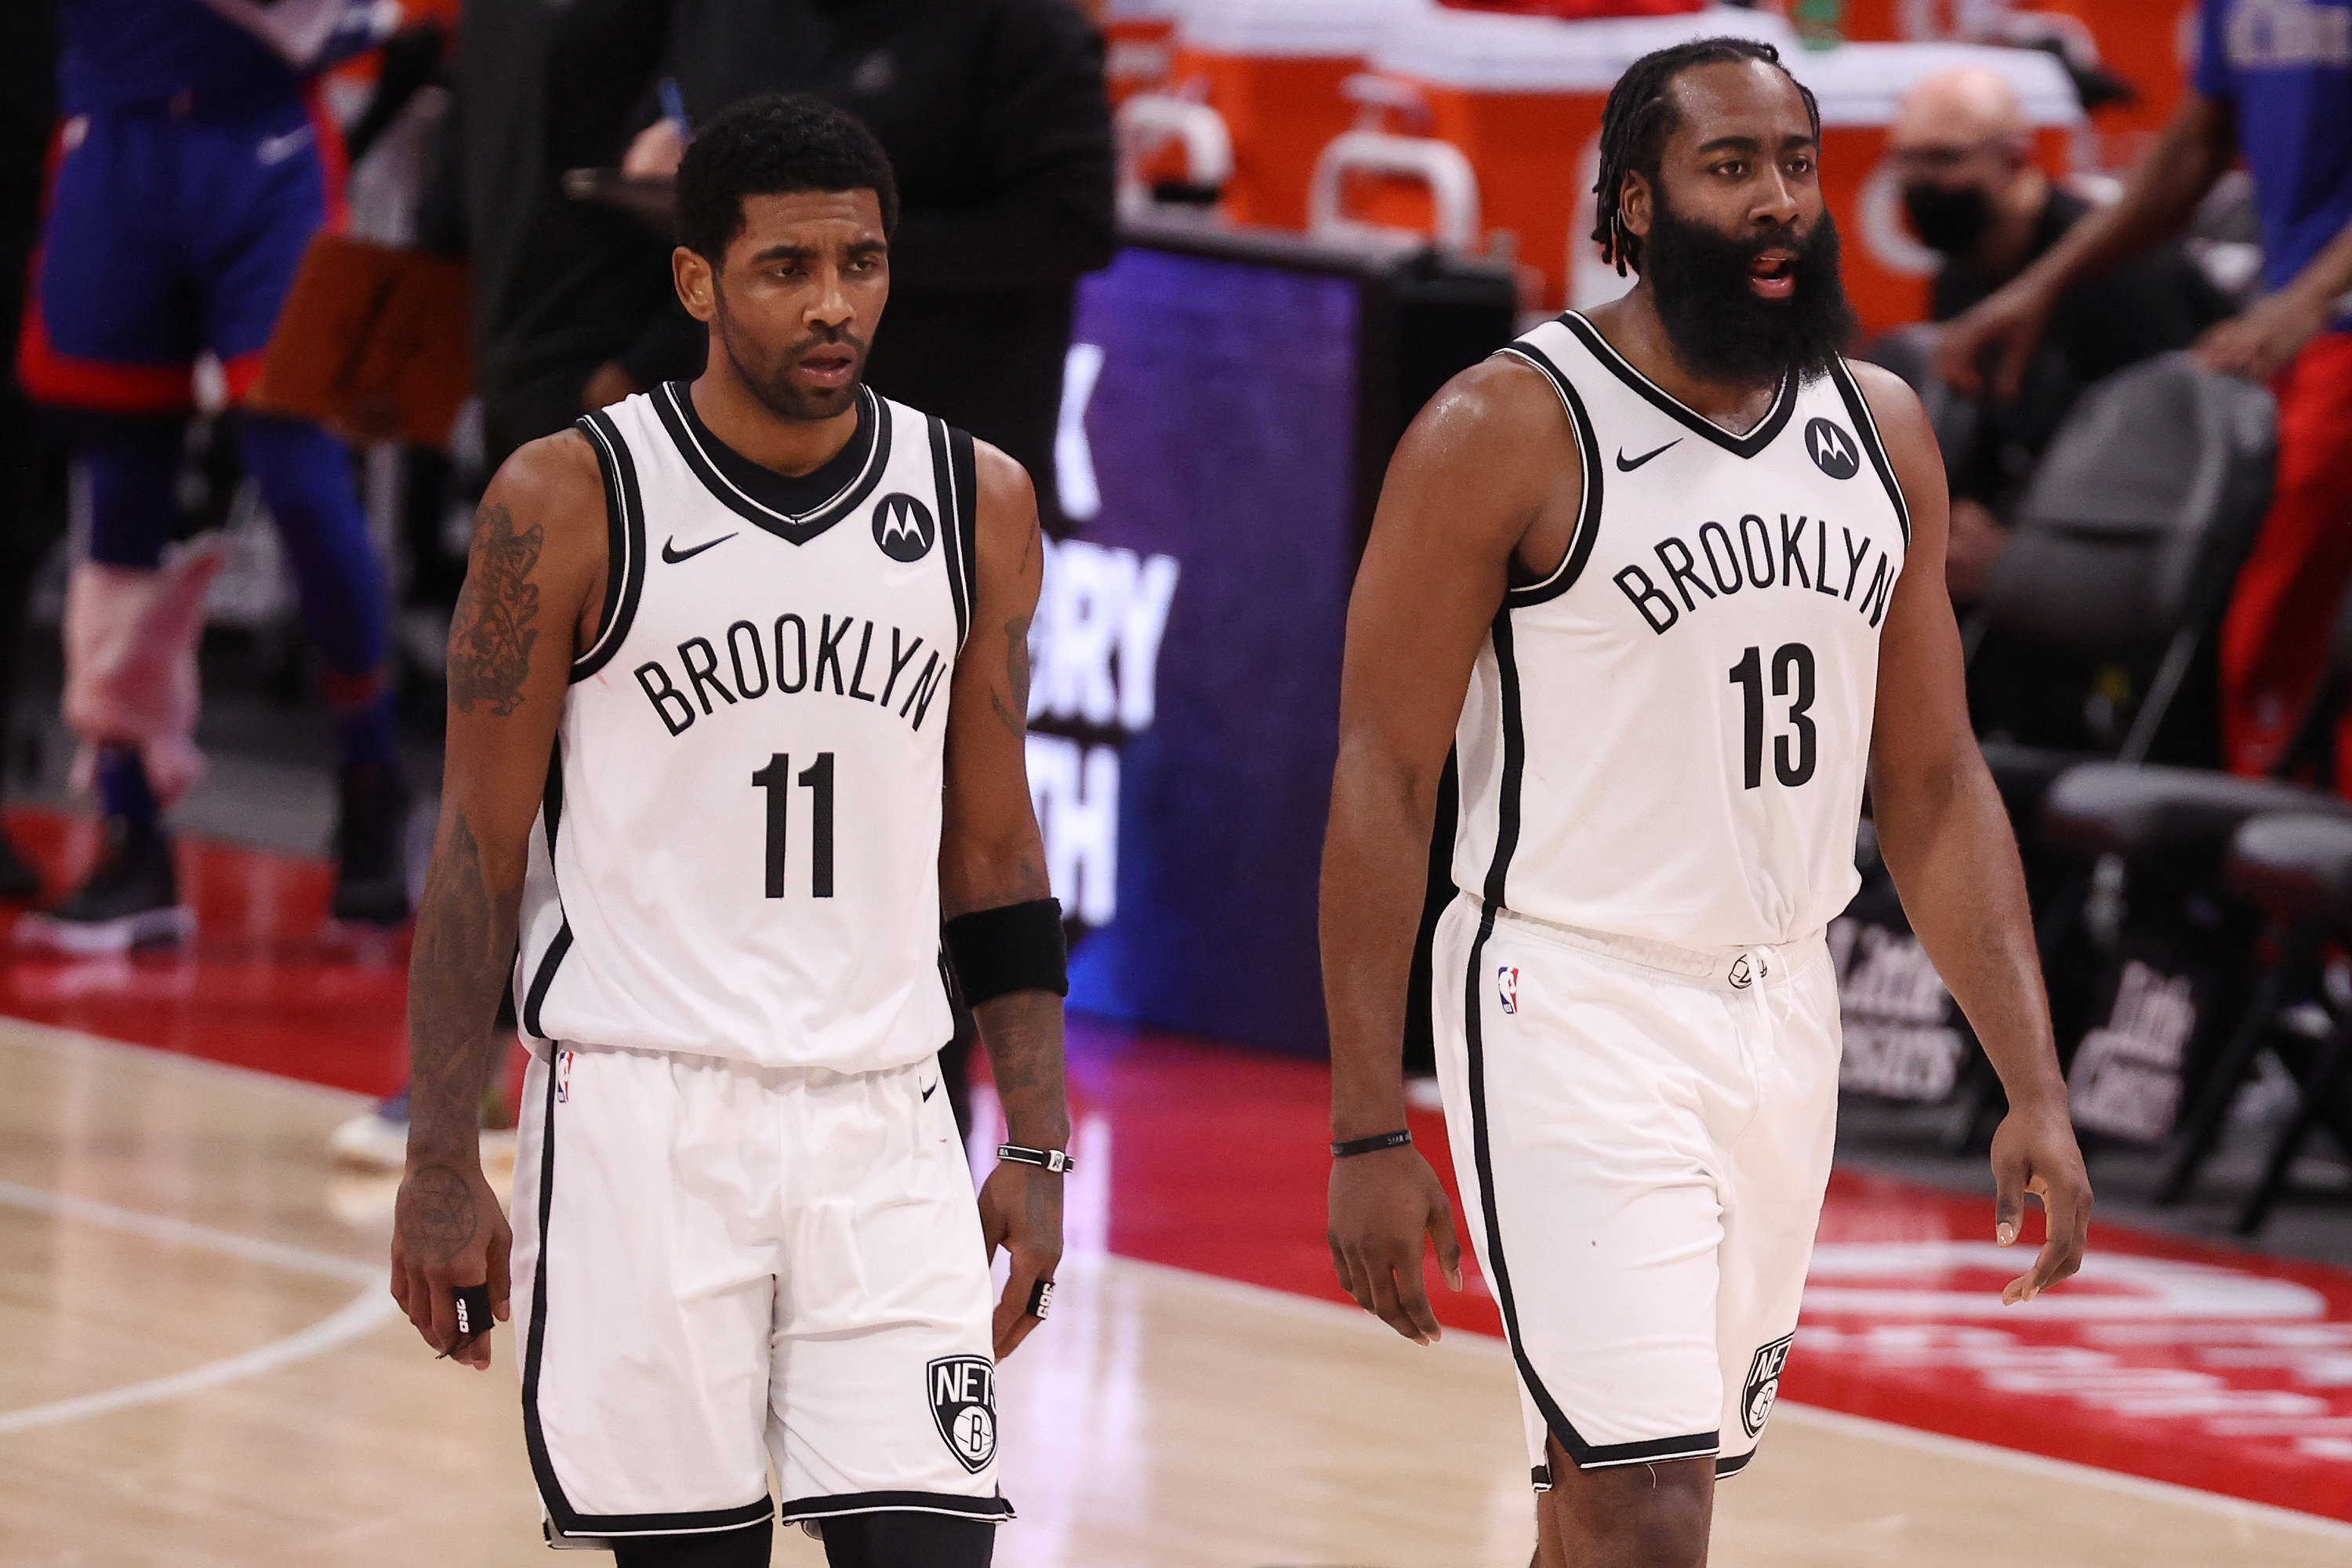 White Brooklyn jerseys with black lettering